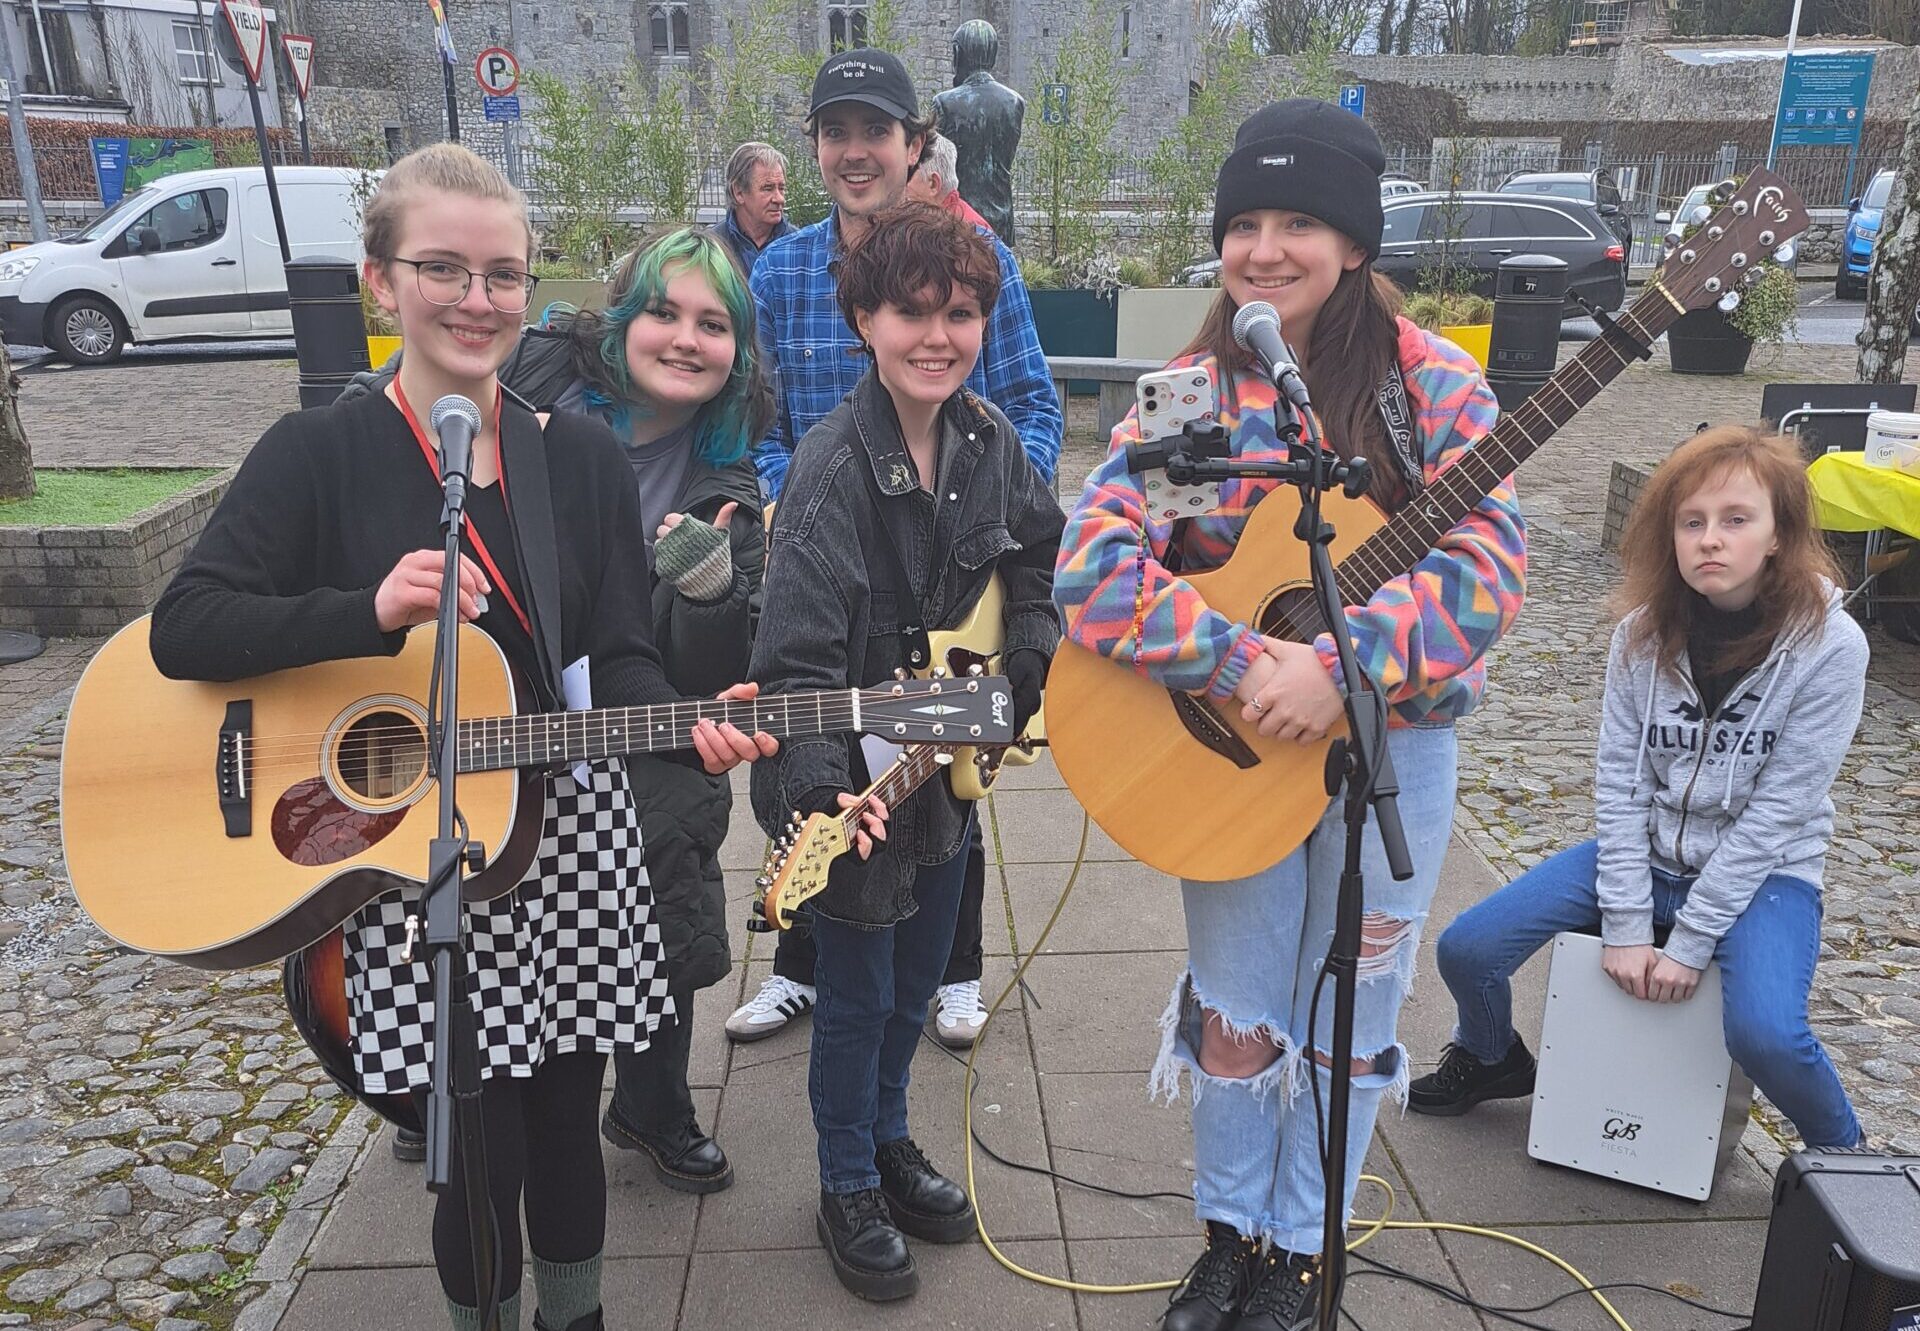 Foróige Creative Minds group performs at The Big Busk